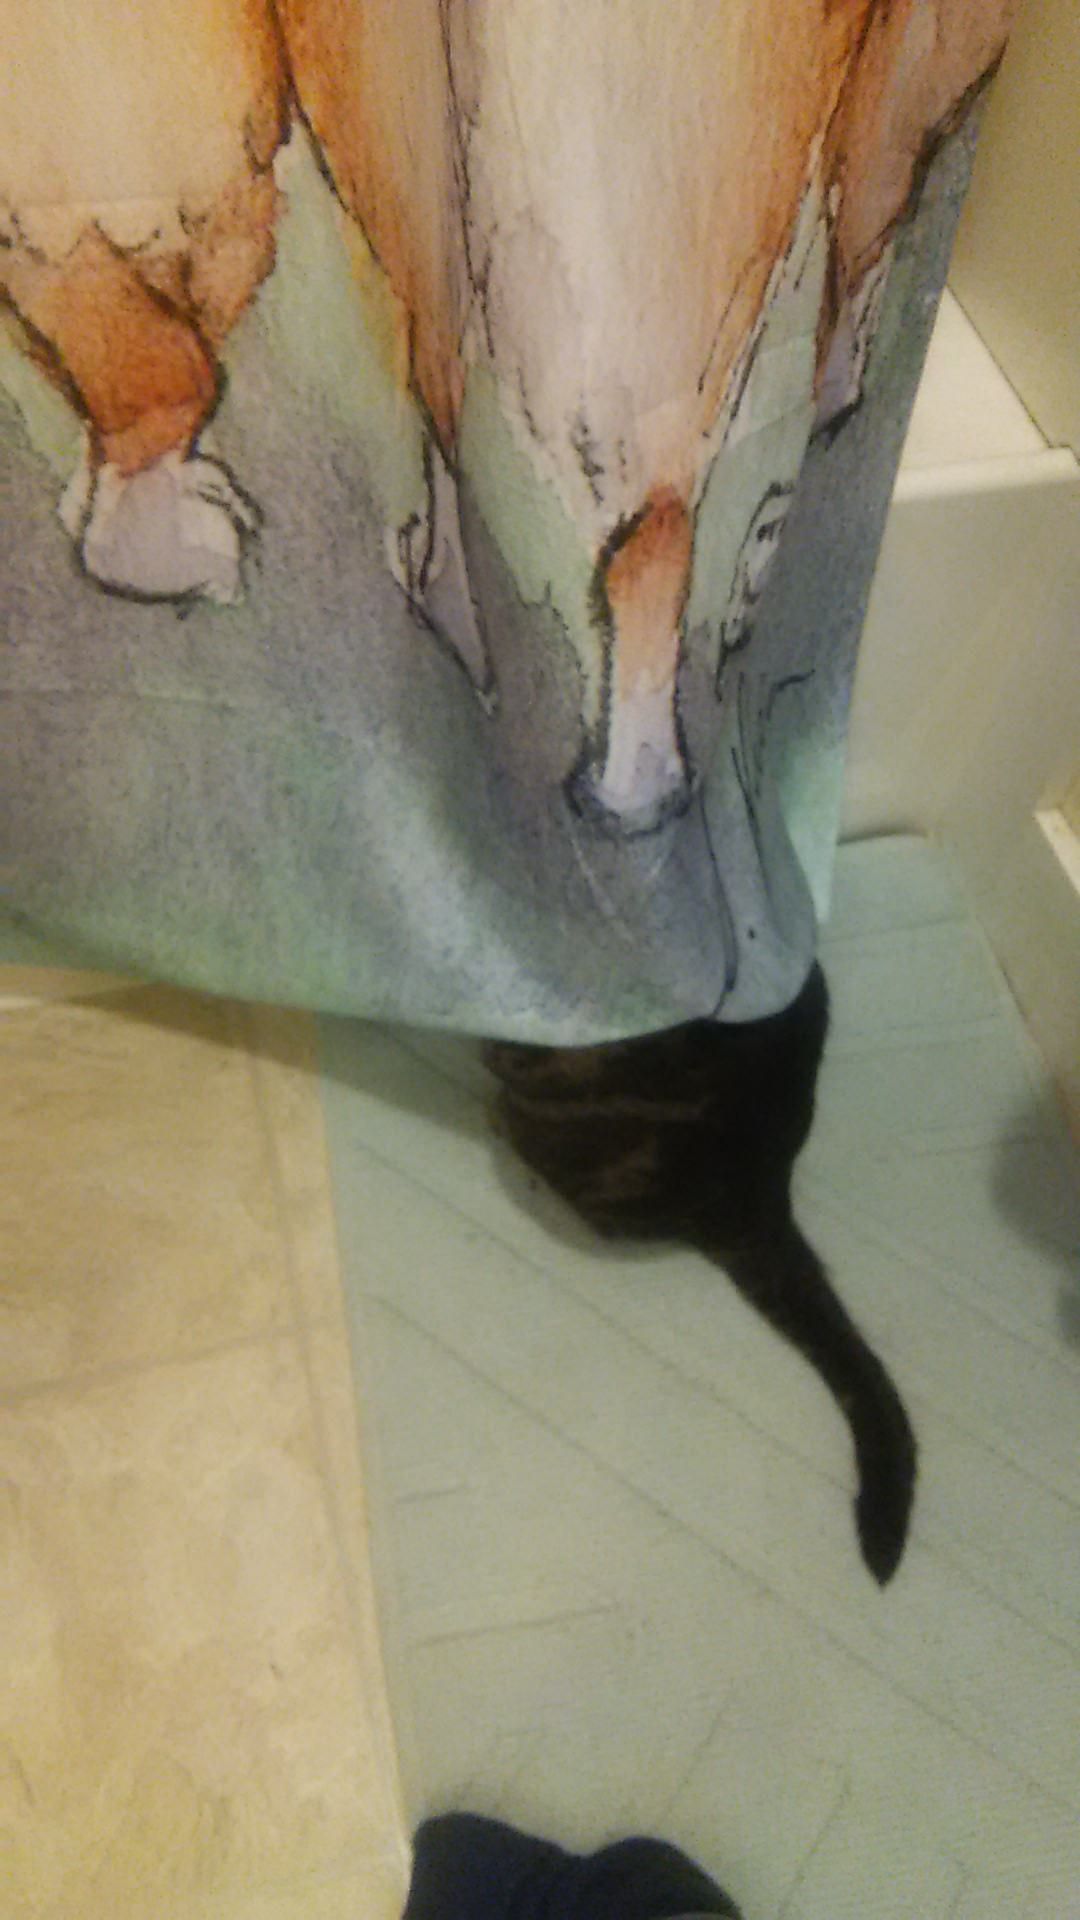 My pervert cat is watching my girlfriend take a shower.